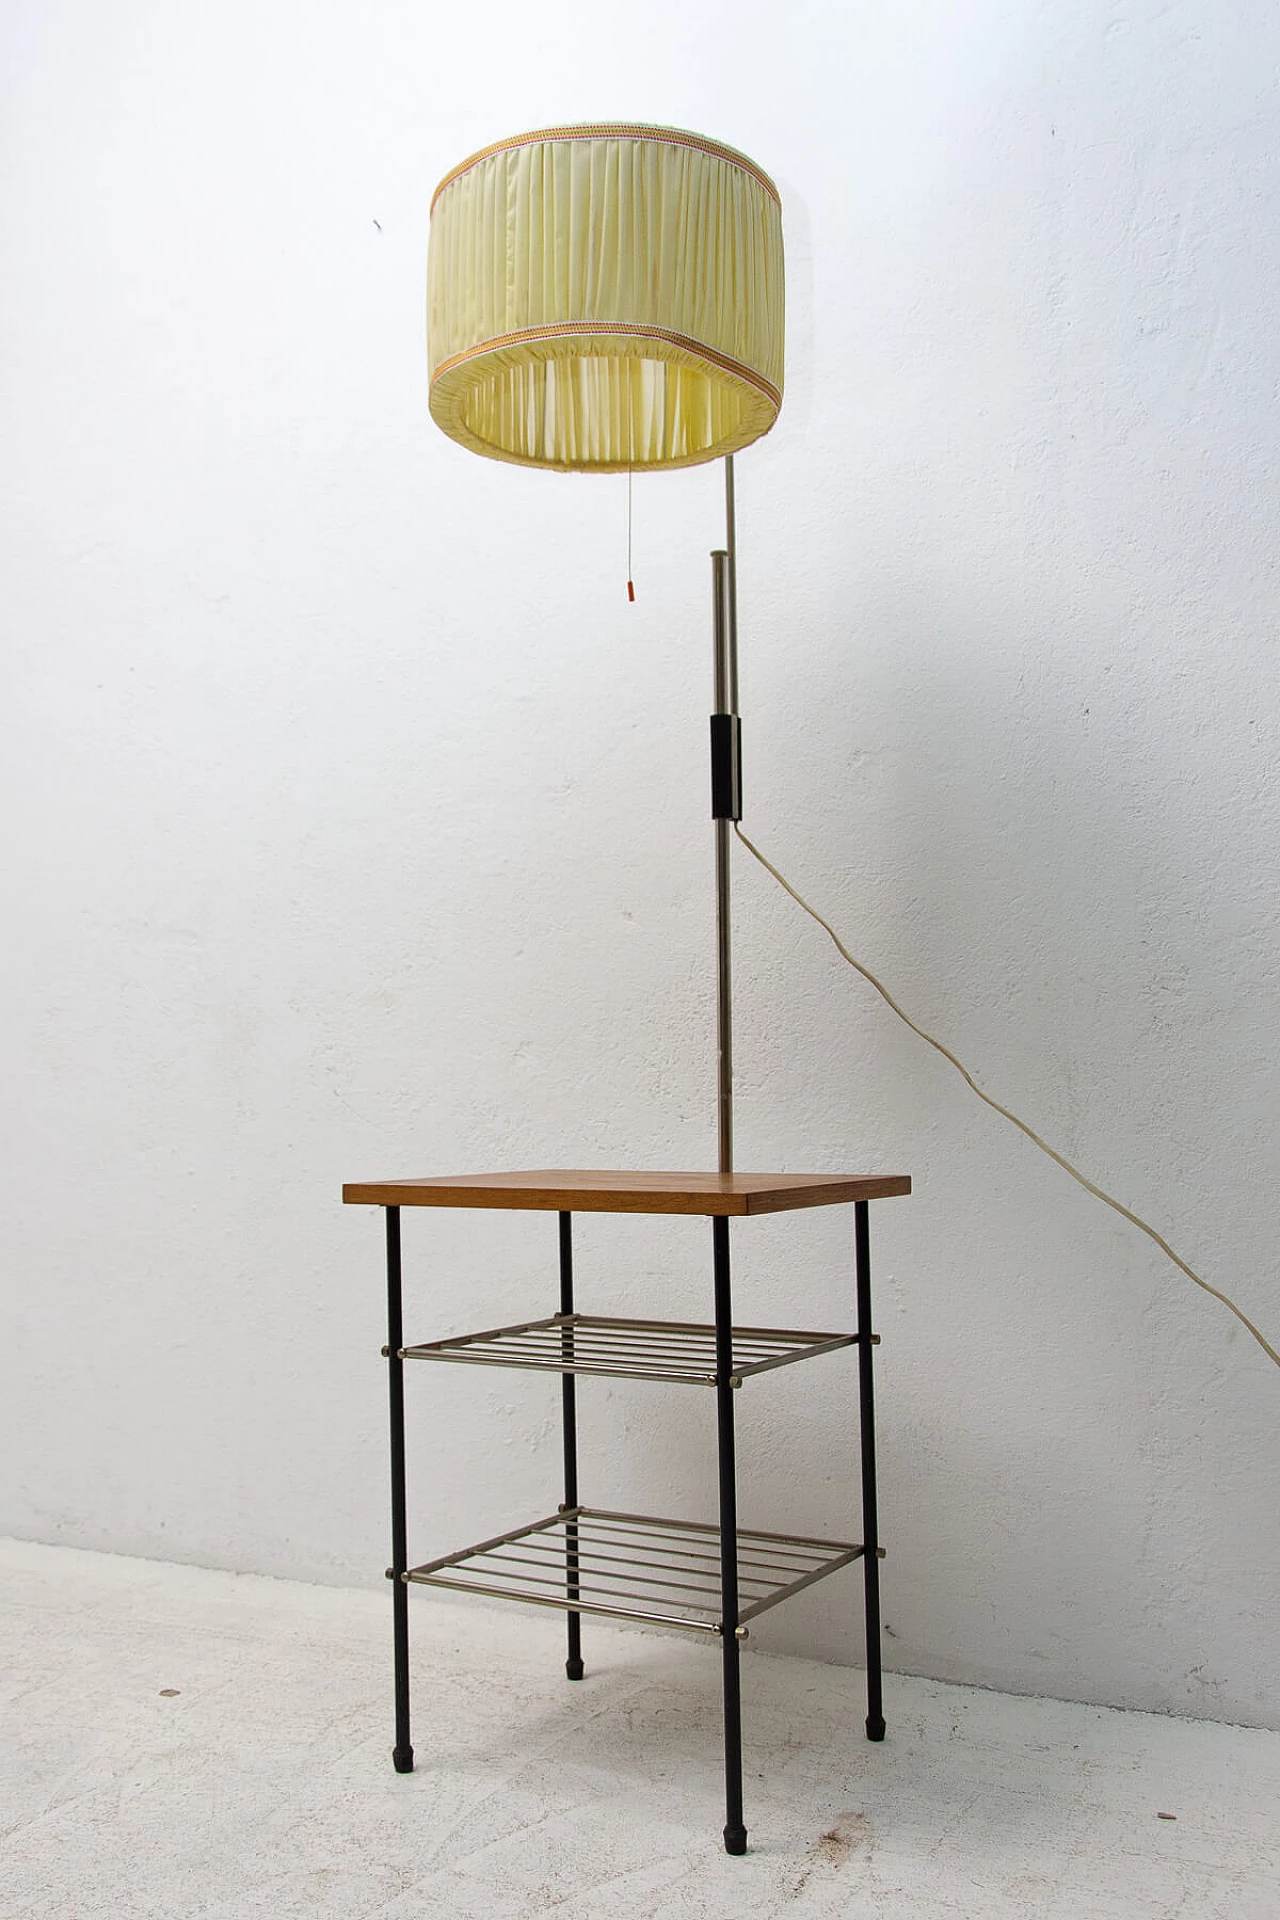 Floor lamp with storage compartment, 1970s 1364362